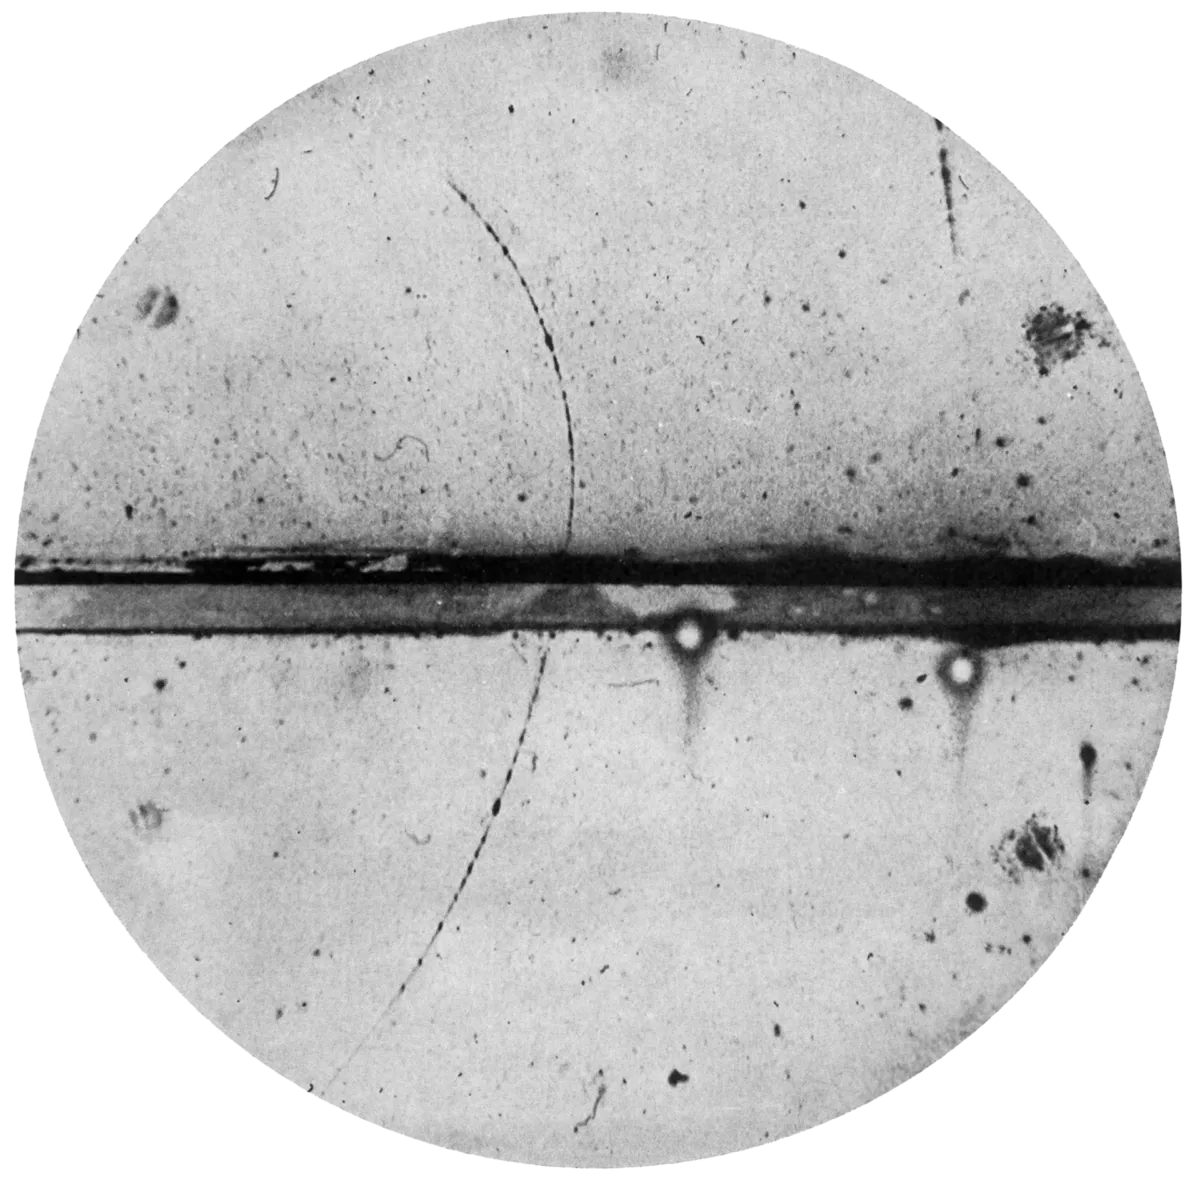  An image of the first positron ever observed. Credit: Carl D. Anderson (1905–1991) - Anderson, Carl D. (1933). "The Positive Electron". Physical Review 43 (6): 491–494. DOI:10.1103/PhysRev.43.491.